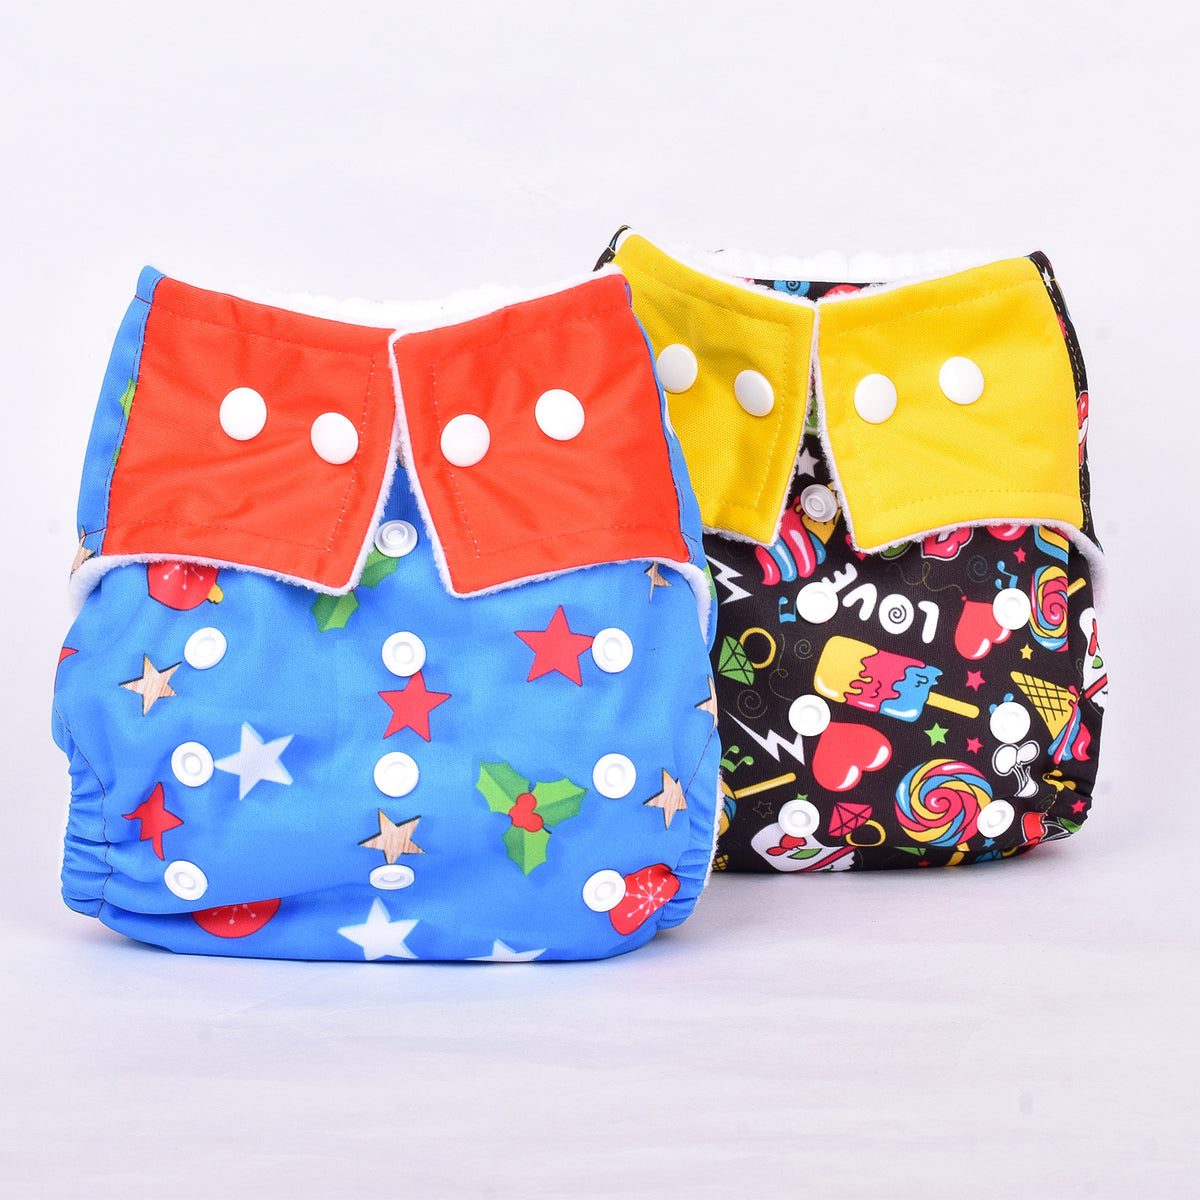 Baby Reusable Cotton Printed Pocket Diapers With 2 Inserts - Pack of 2 Star, Love